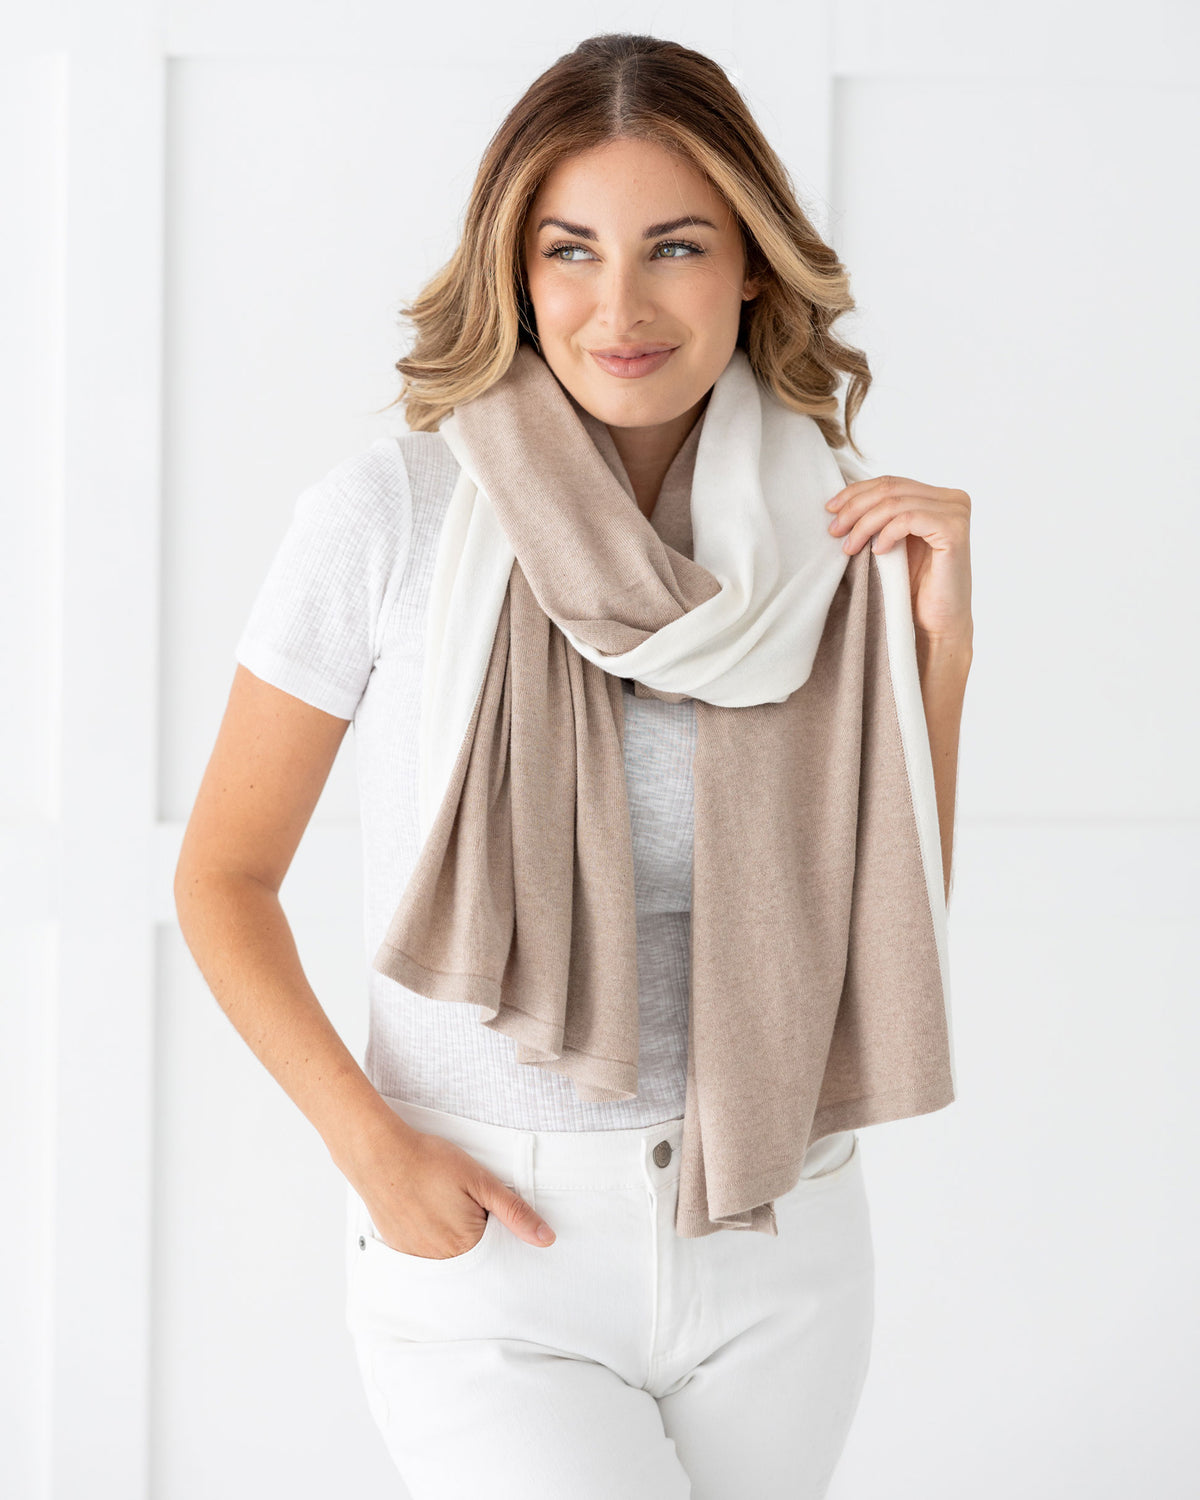 Cashmere Cotton Luxe Travel Scarf - Sandstone and Ivory Colorblock